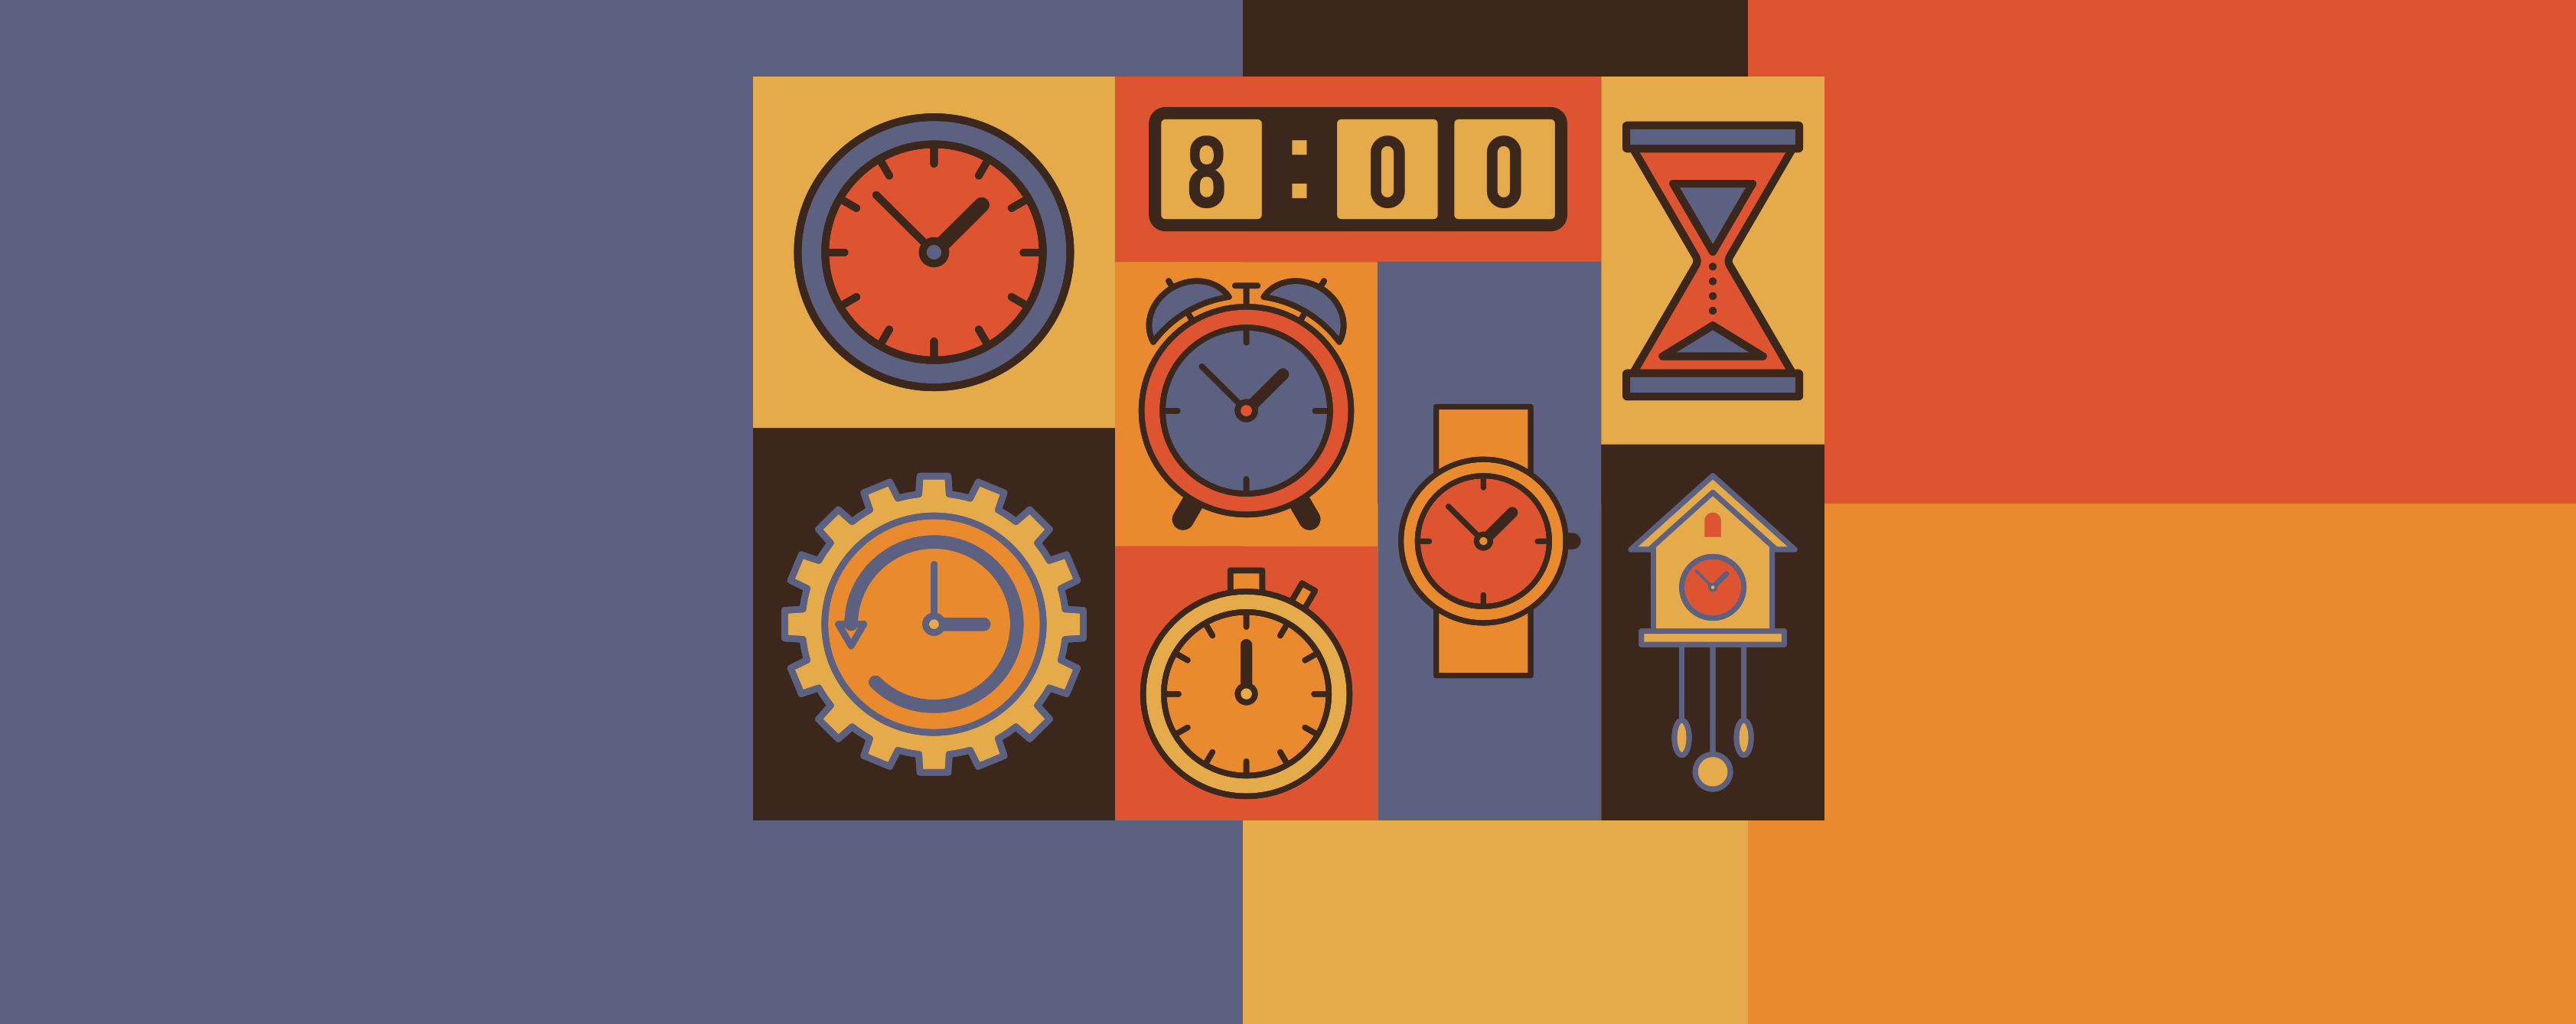 most useful time clock apps